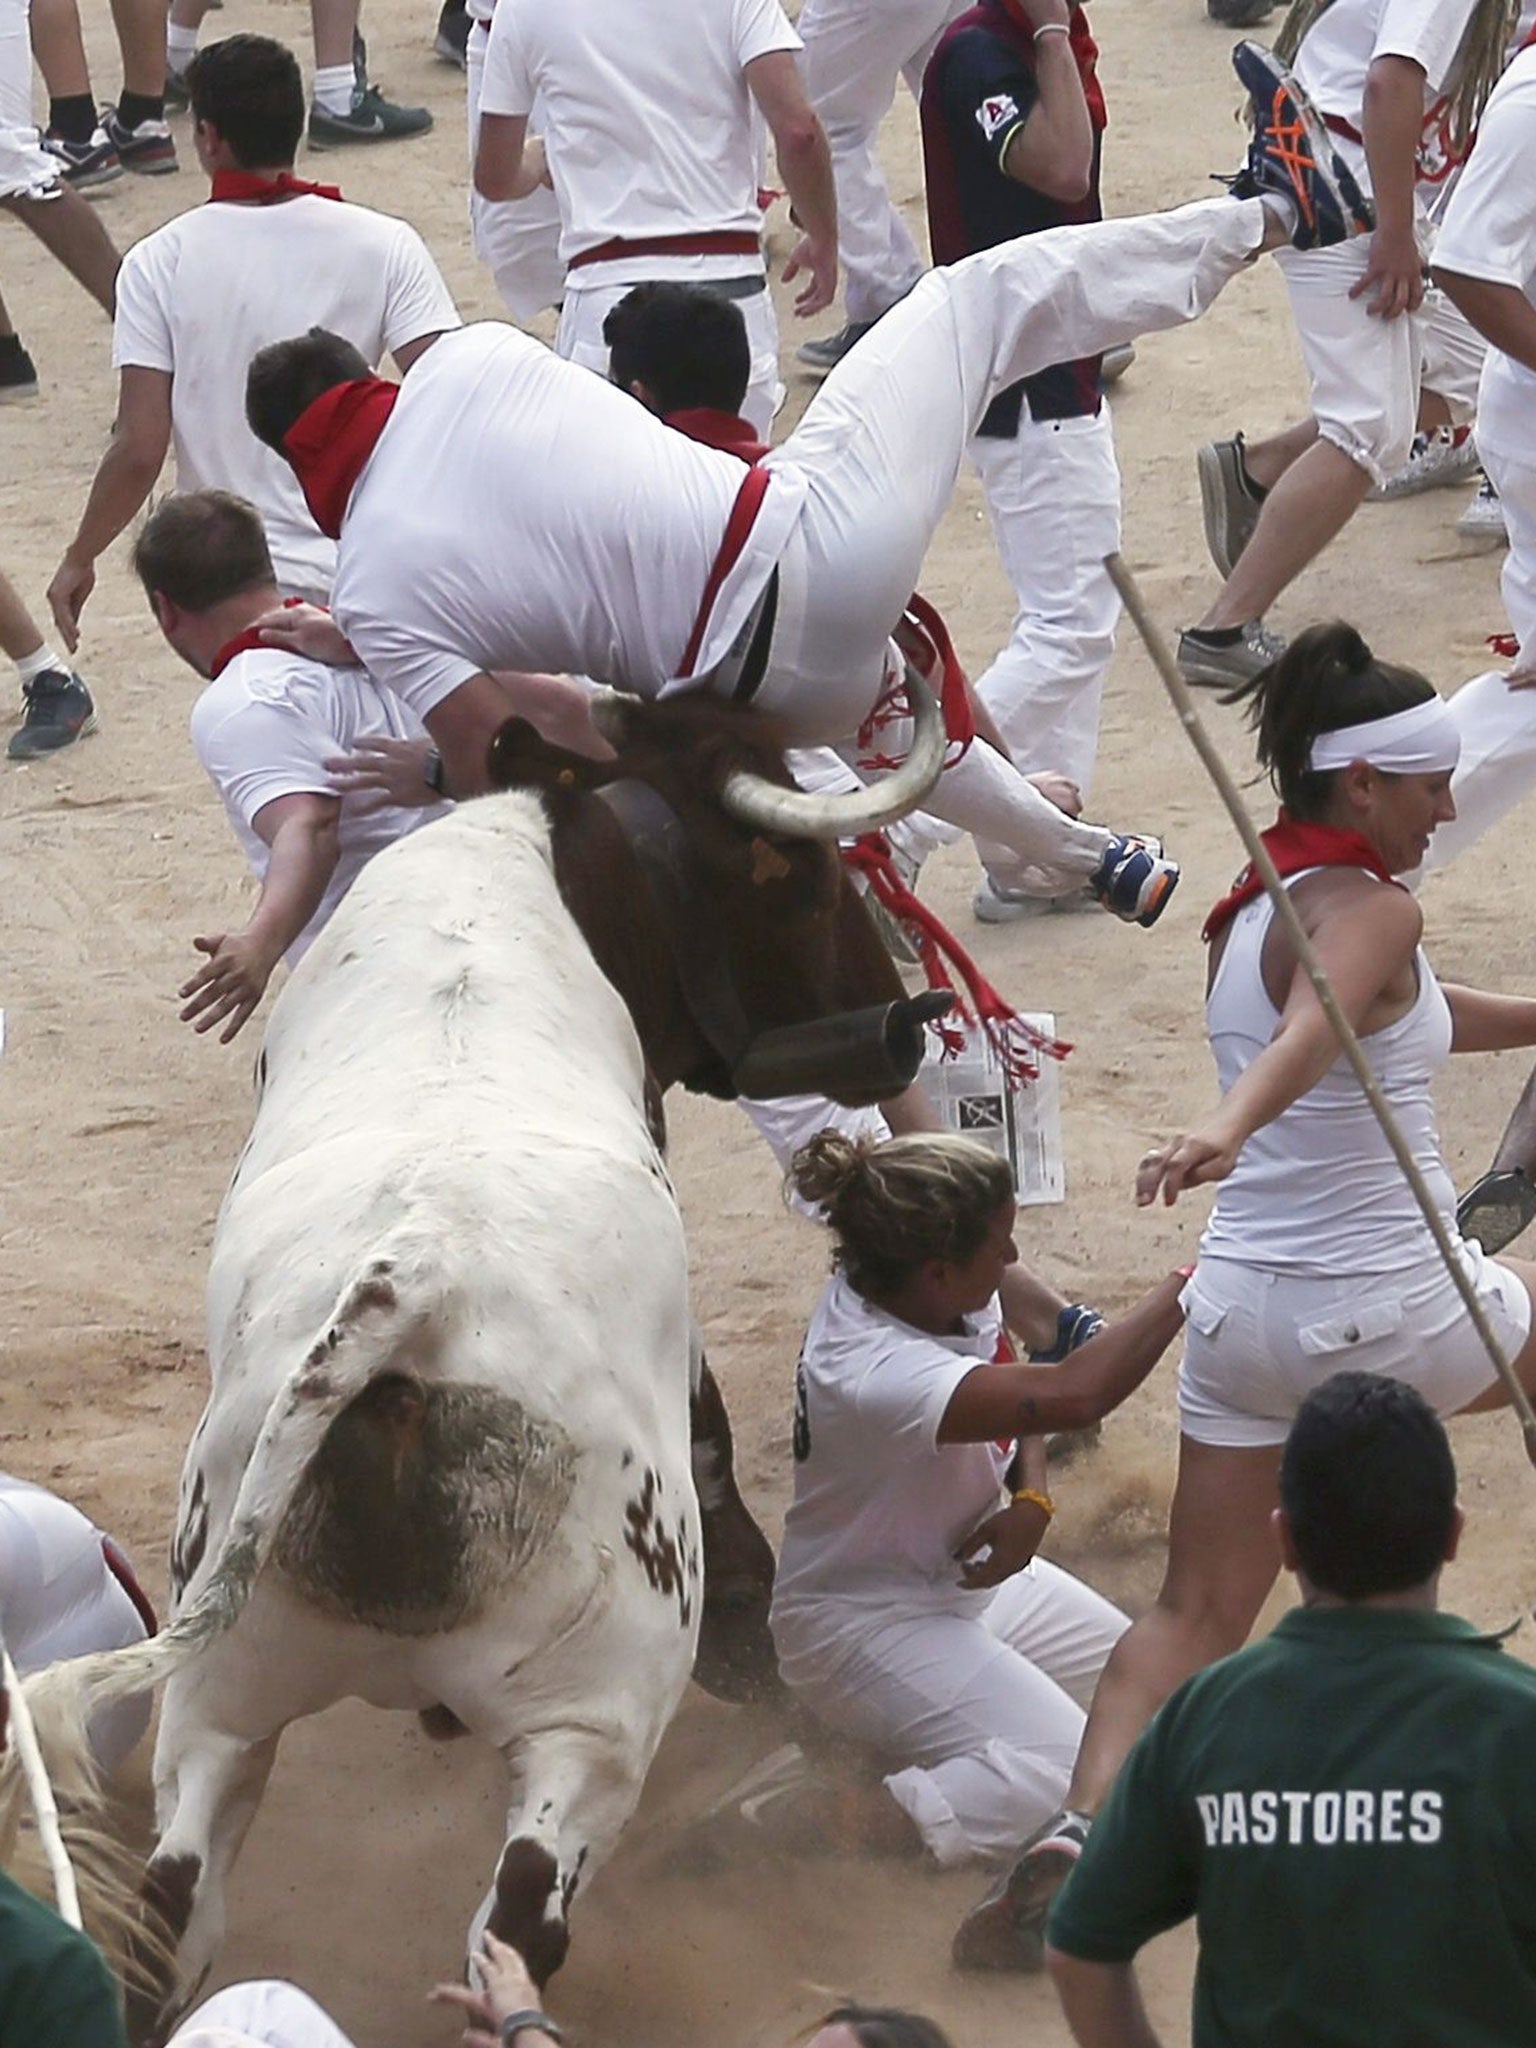 A runner is gored by a bull